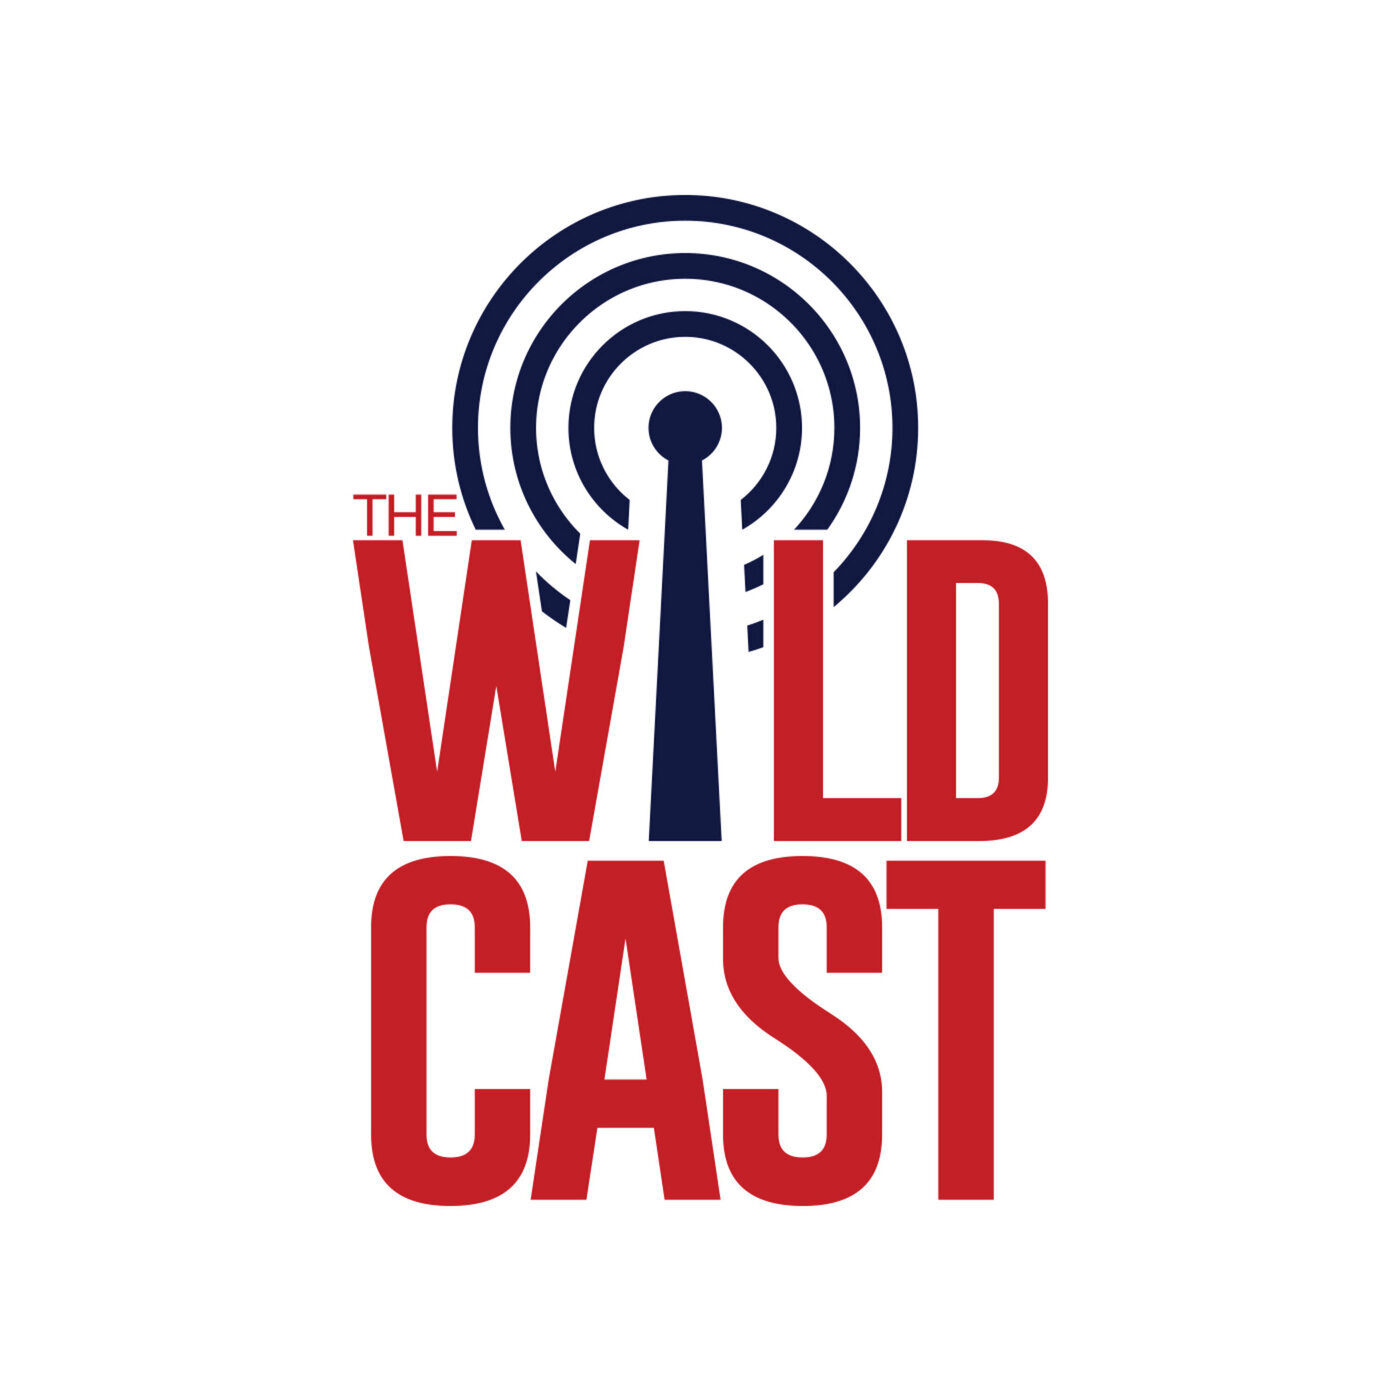 The Wildcast, Episode 459: Answering your questions on UA football recruiting, coaching moves, what to do about Arizona Stadium and more